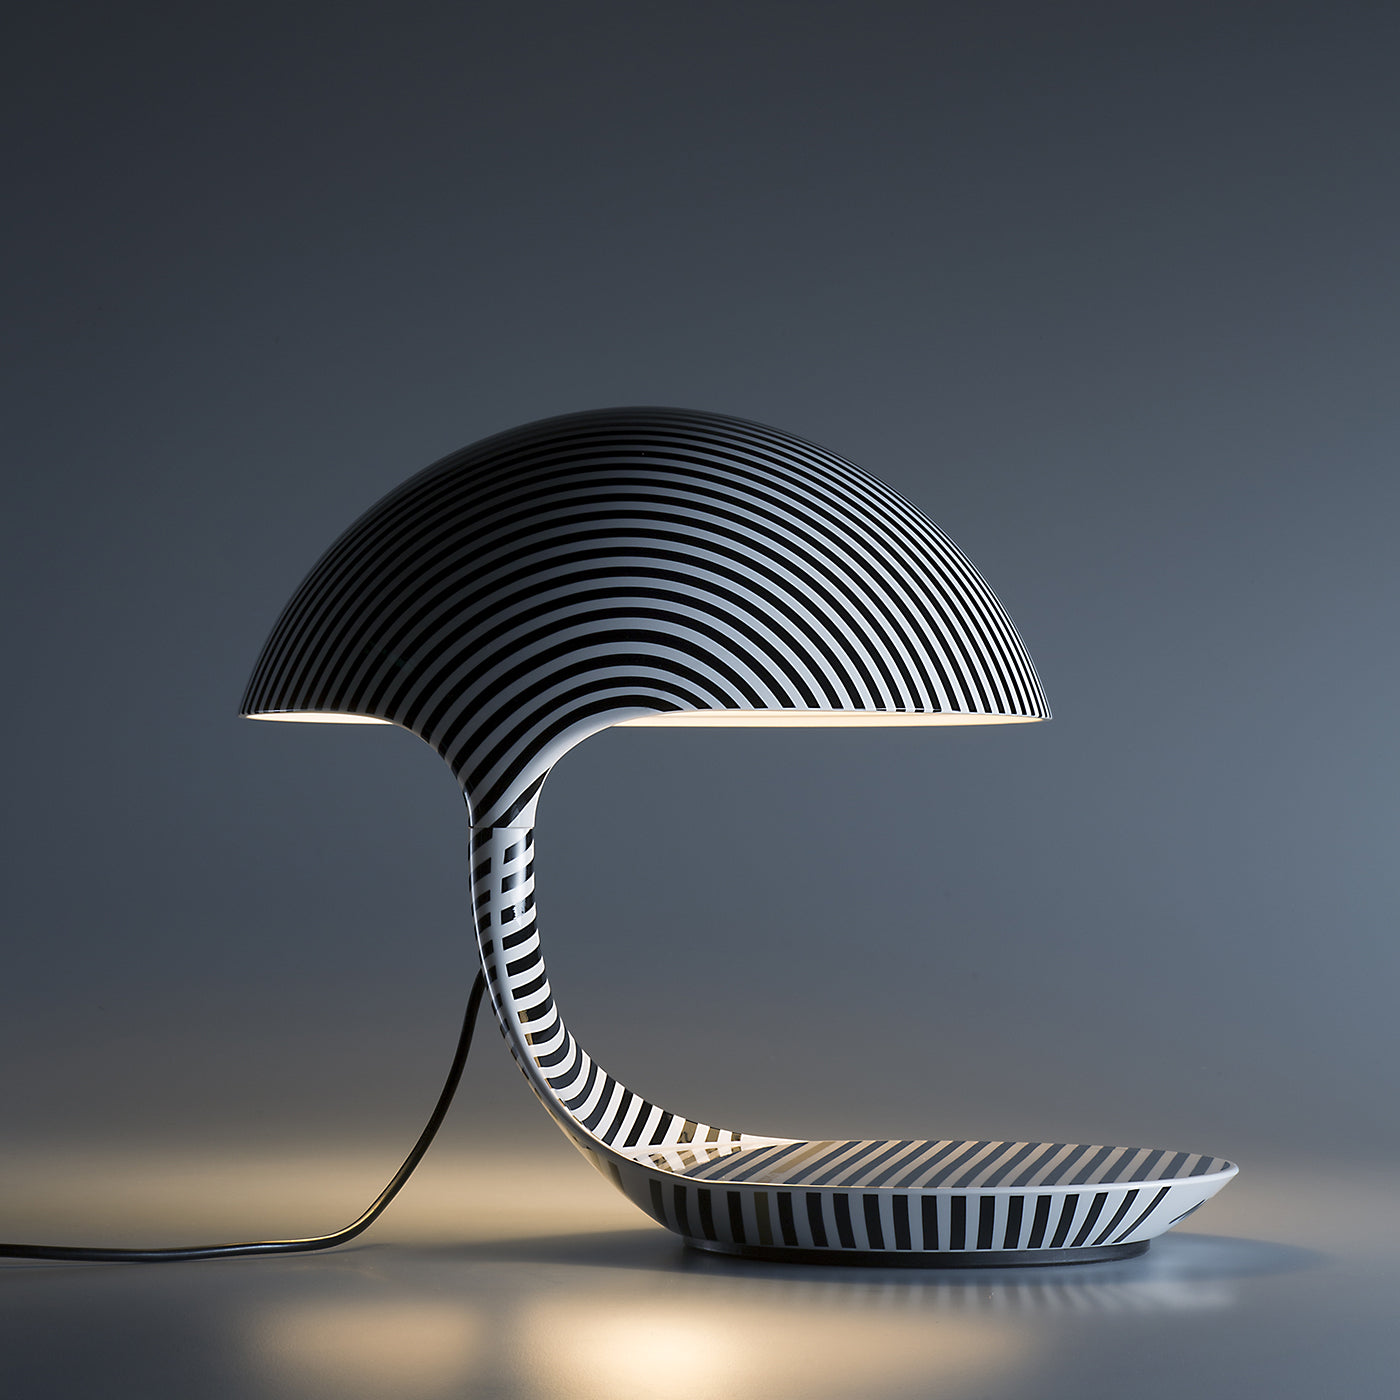 Cobra Texture Striped Table Lamp by Area 17 - Alternative view 2